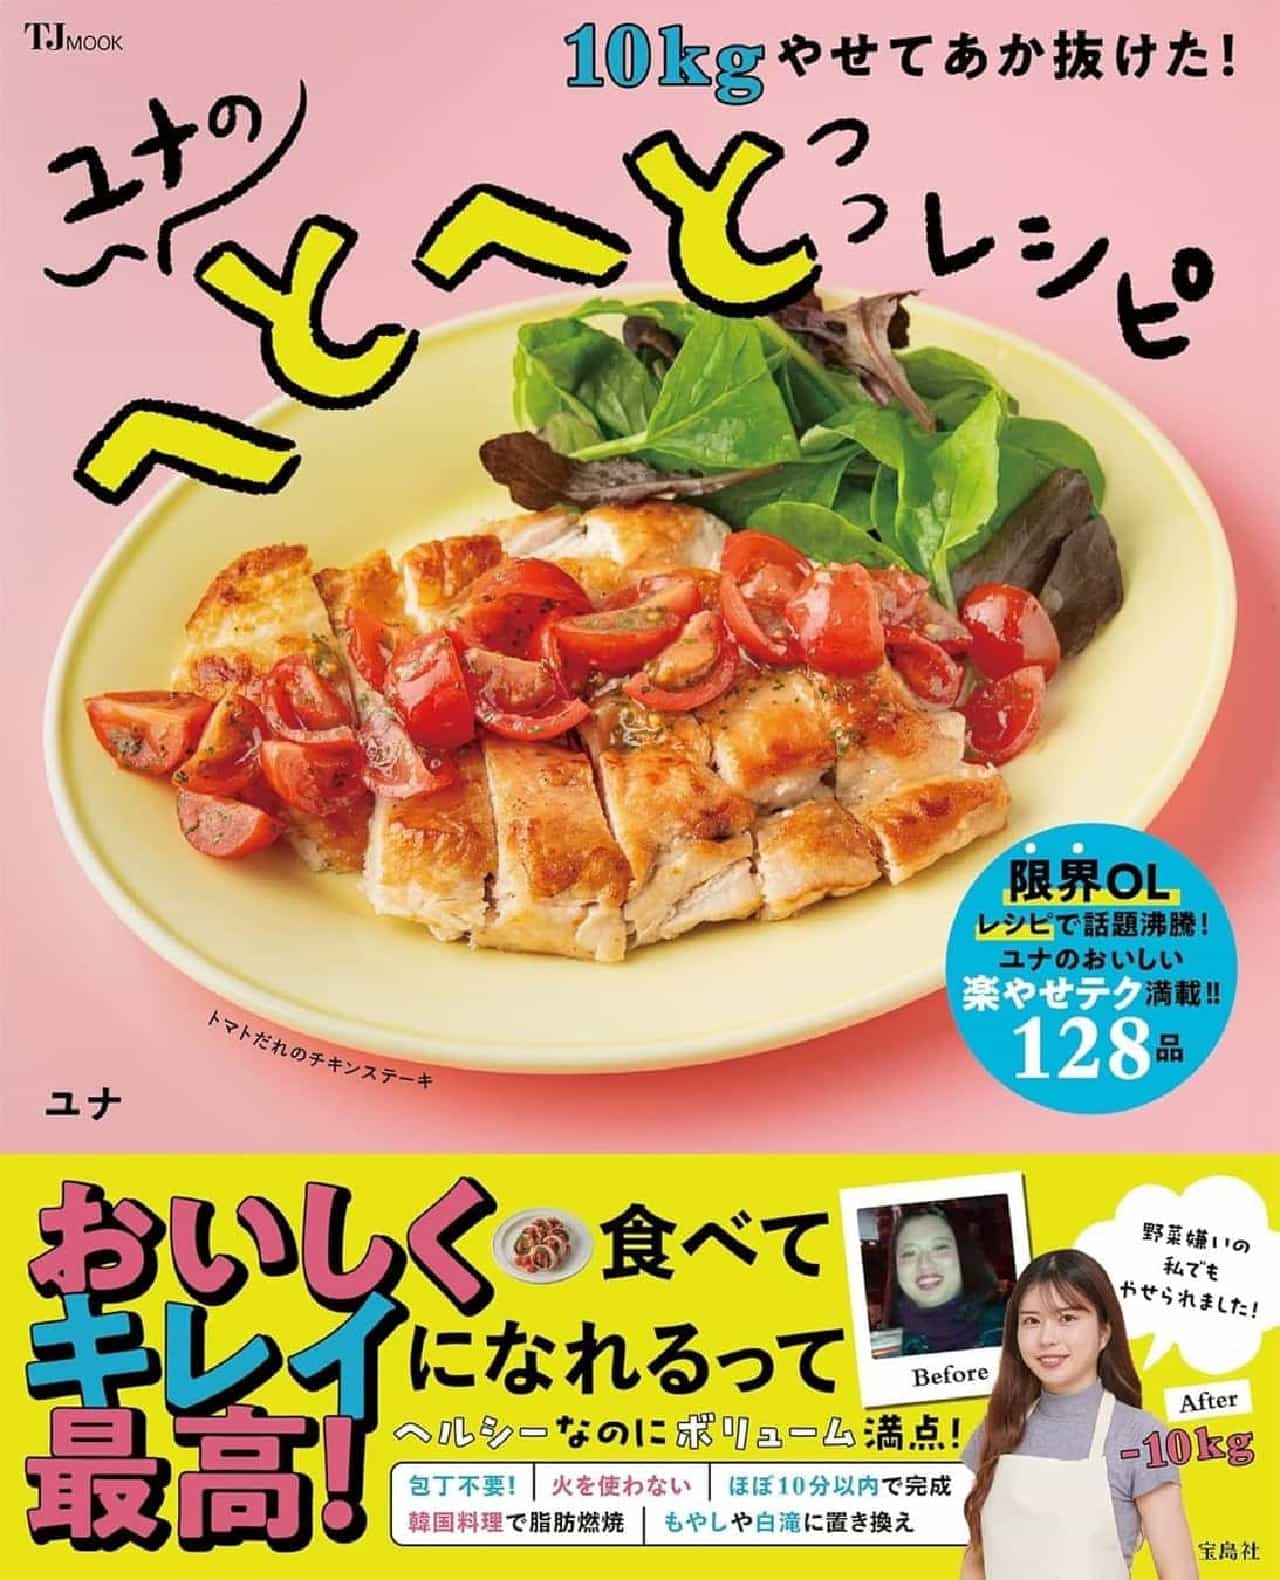 Yuna's Healthy Recipes to Lose 10Kg and Look Red! Yuna's Healthy Recipes" will be released on May 20, 2012] The first recipe book by SNS popular cook Yuna, which introduces 128 simple healthy recipes that can be made in less than 10 minutes, is now available. Image 1